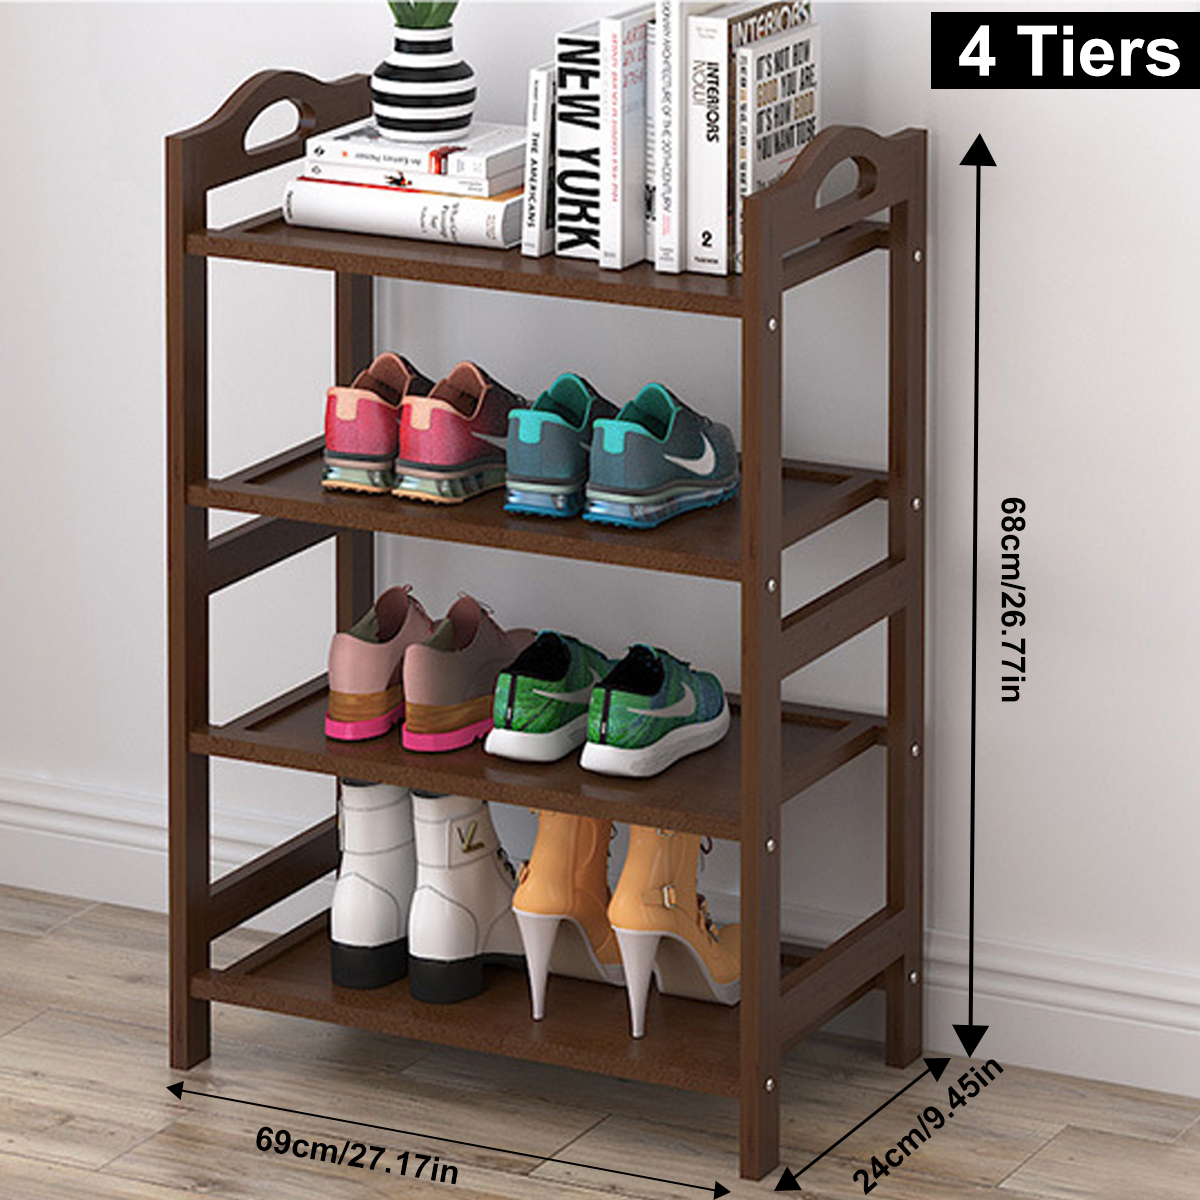 3456-Tiers-Shoe-Rack-Multi-layers-Storage-Shelf-Space-Saving-Organizer-Books-Decorations-Stand-for-H-1800948-5